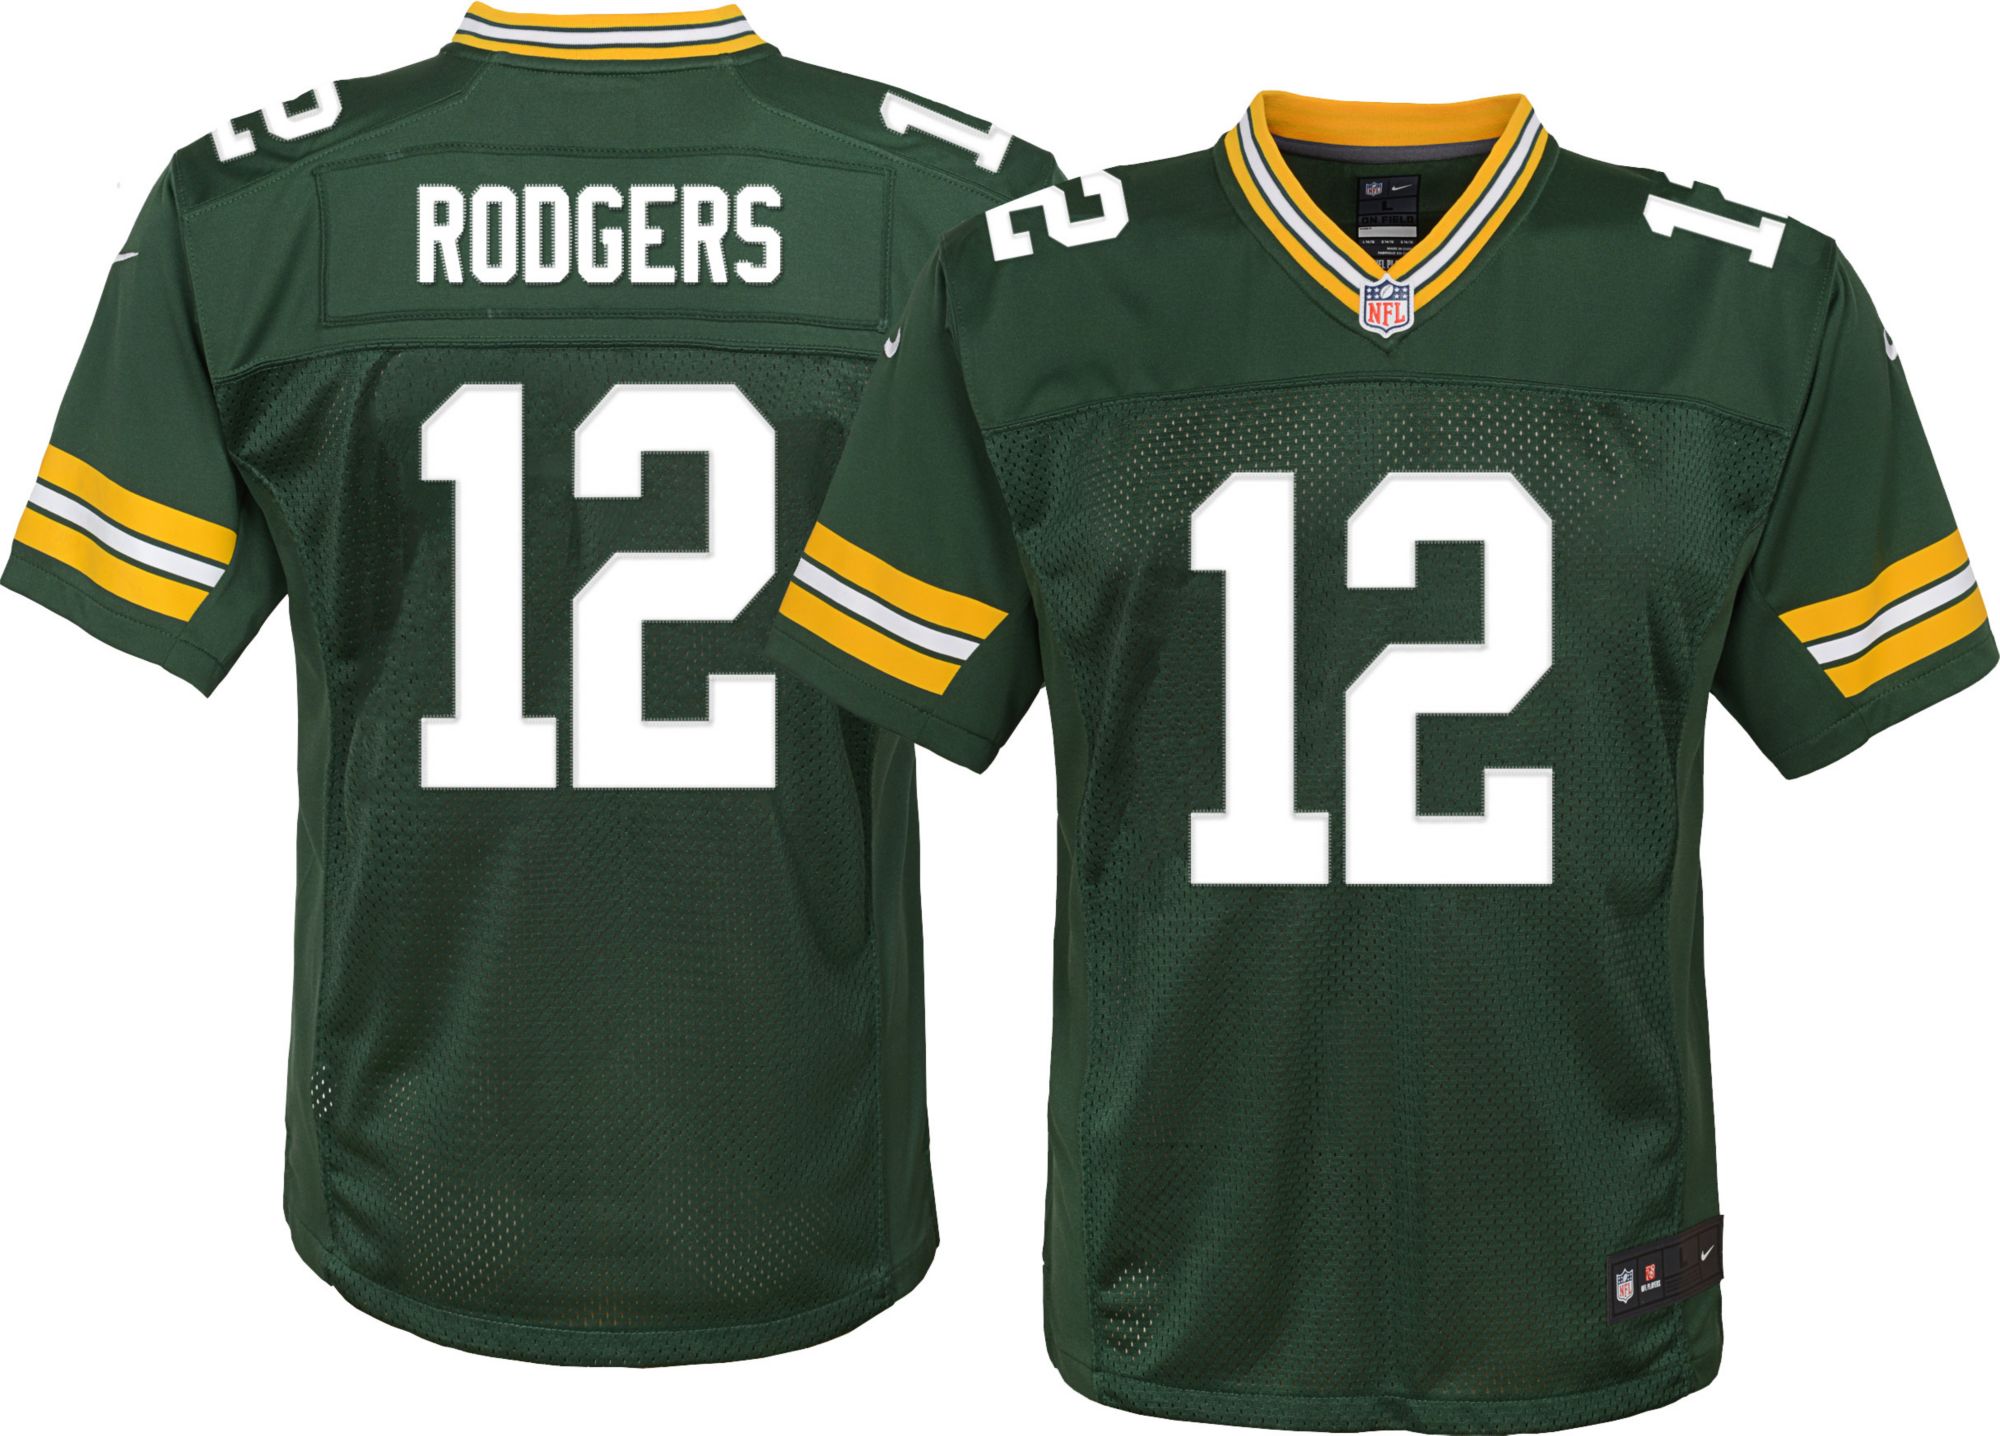 green packers jersey